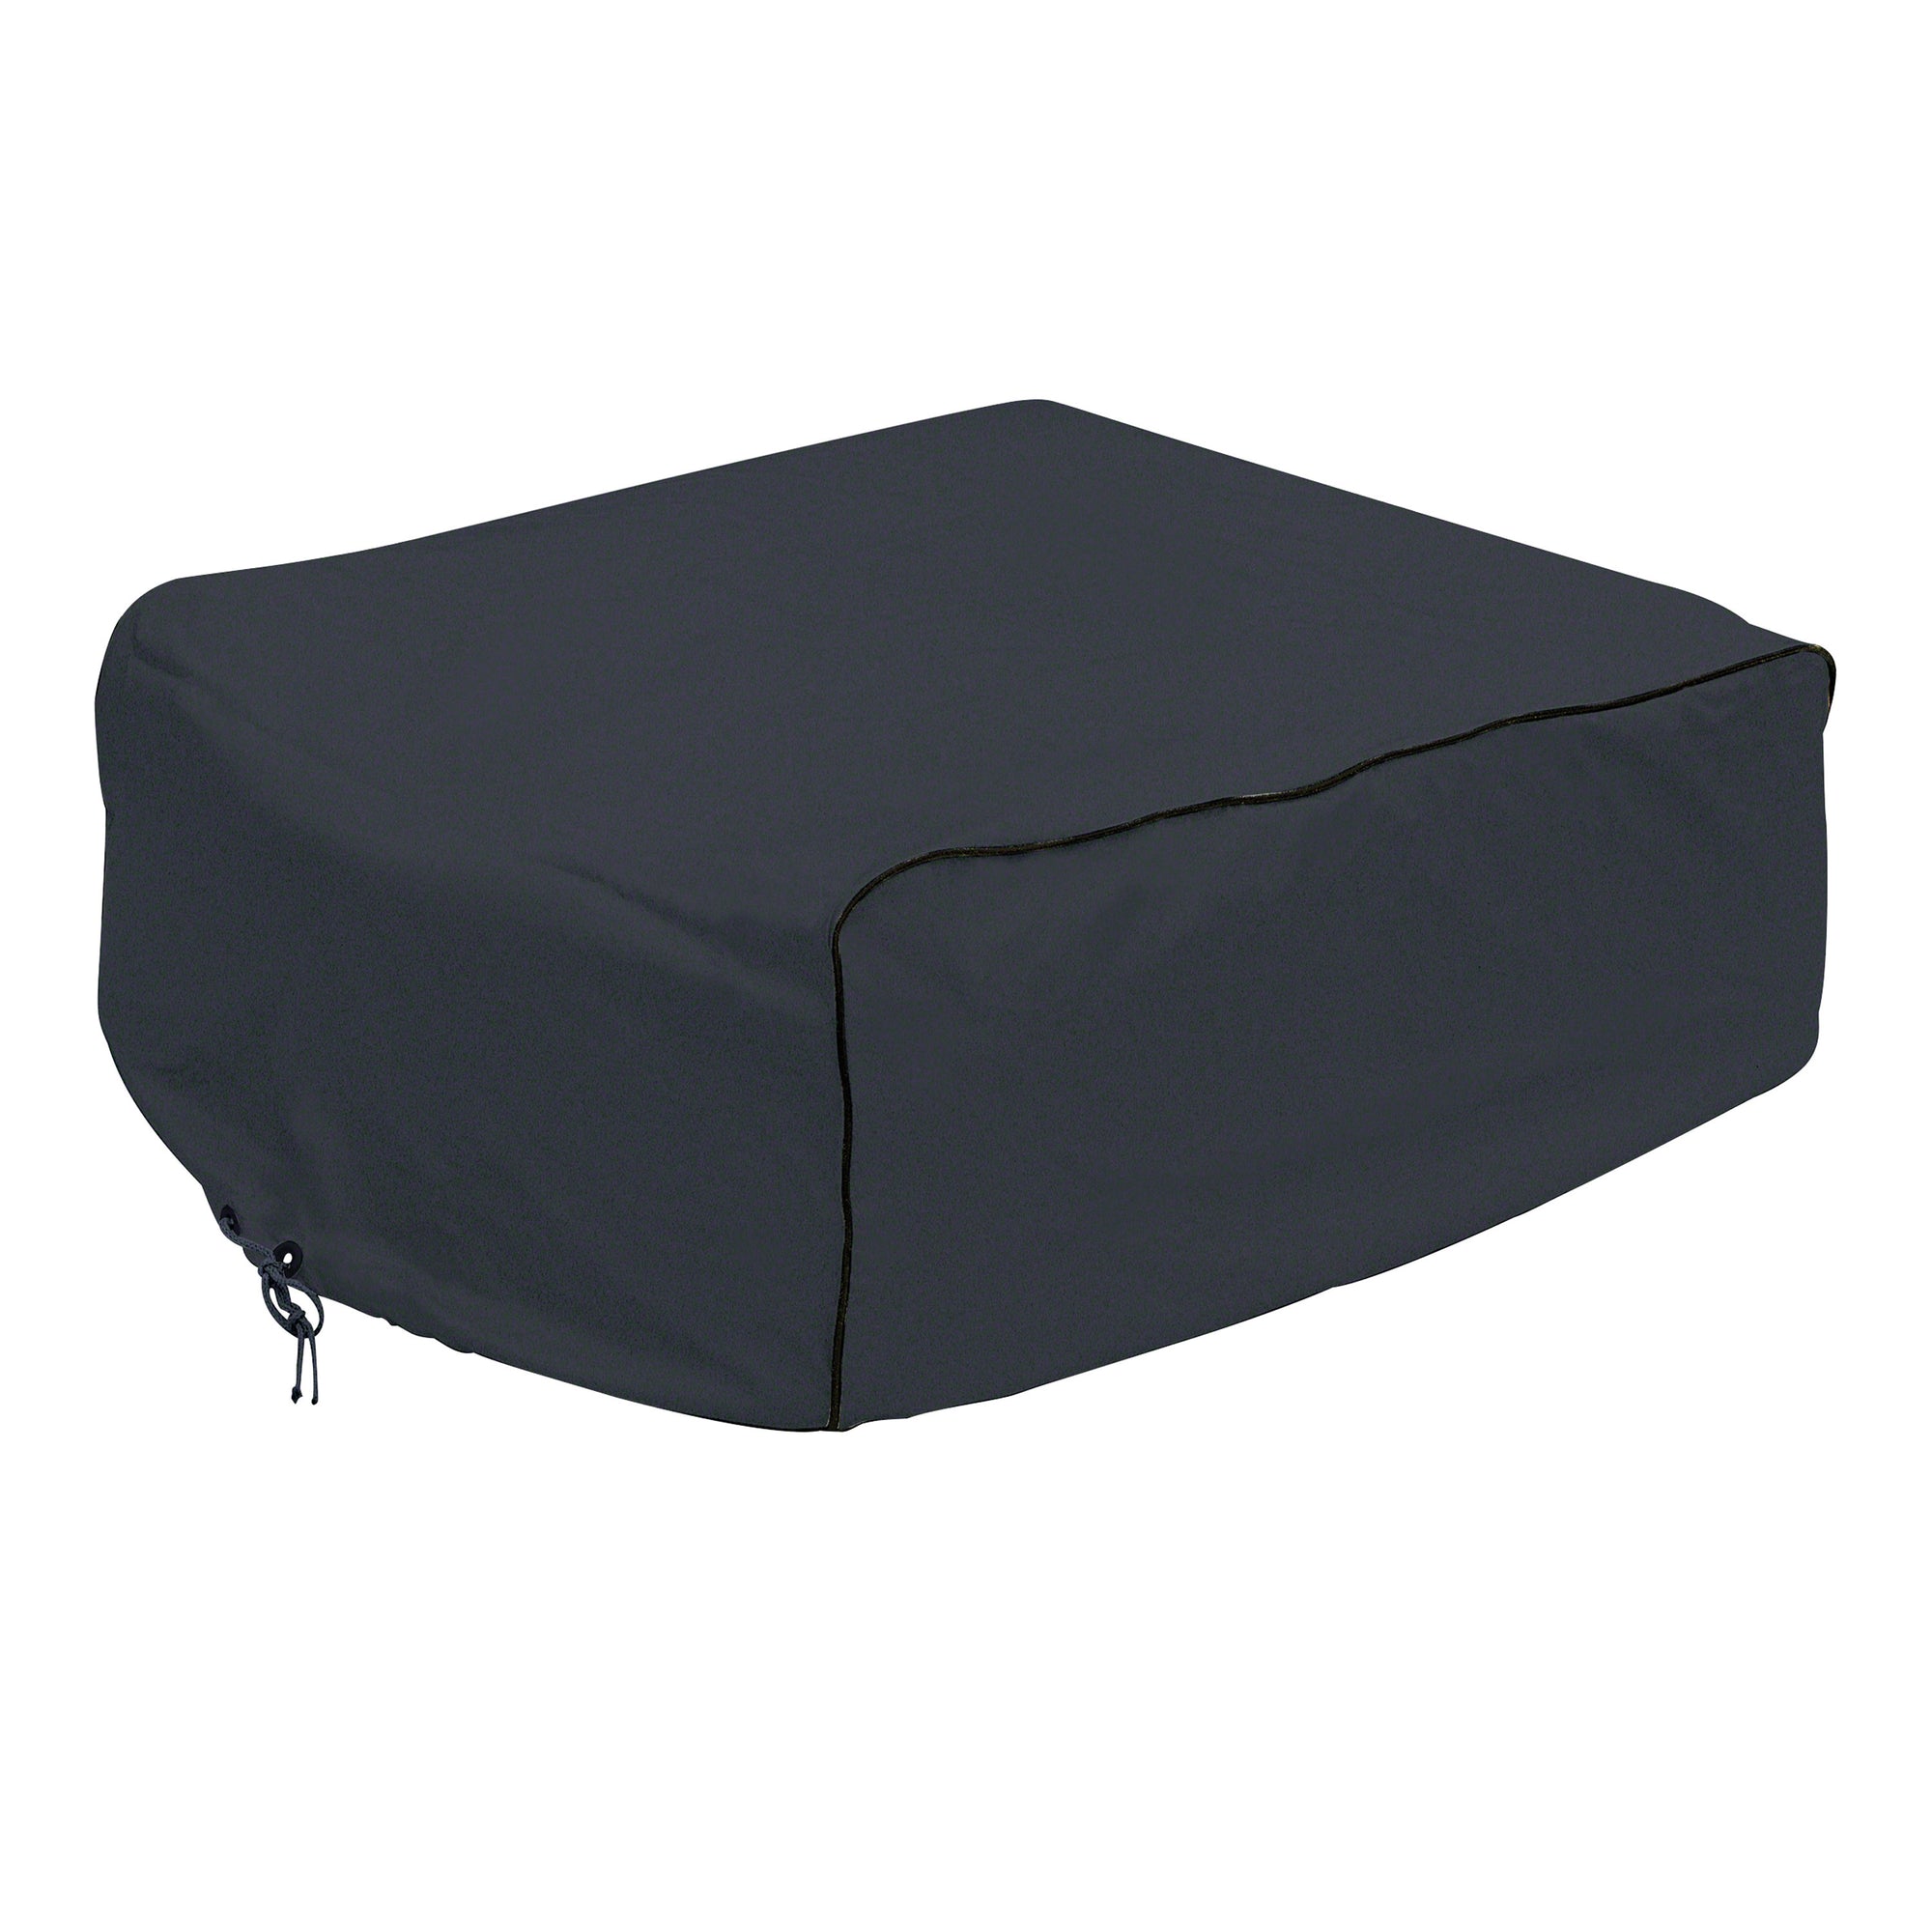 Classic Accessories 80-232 A/C Cover For Duotherm - Black